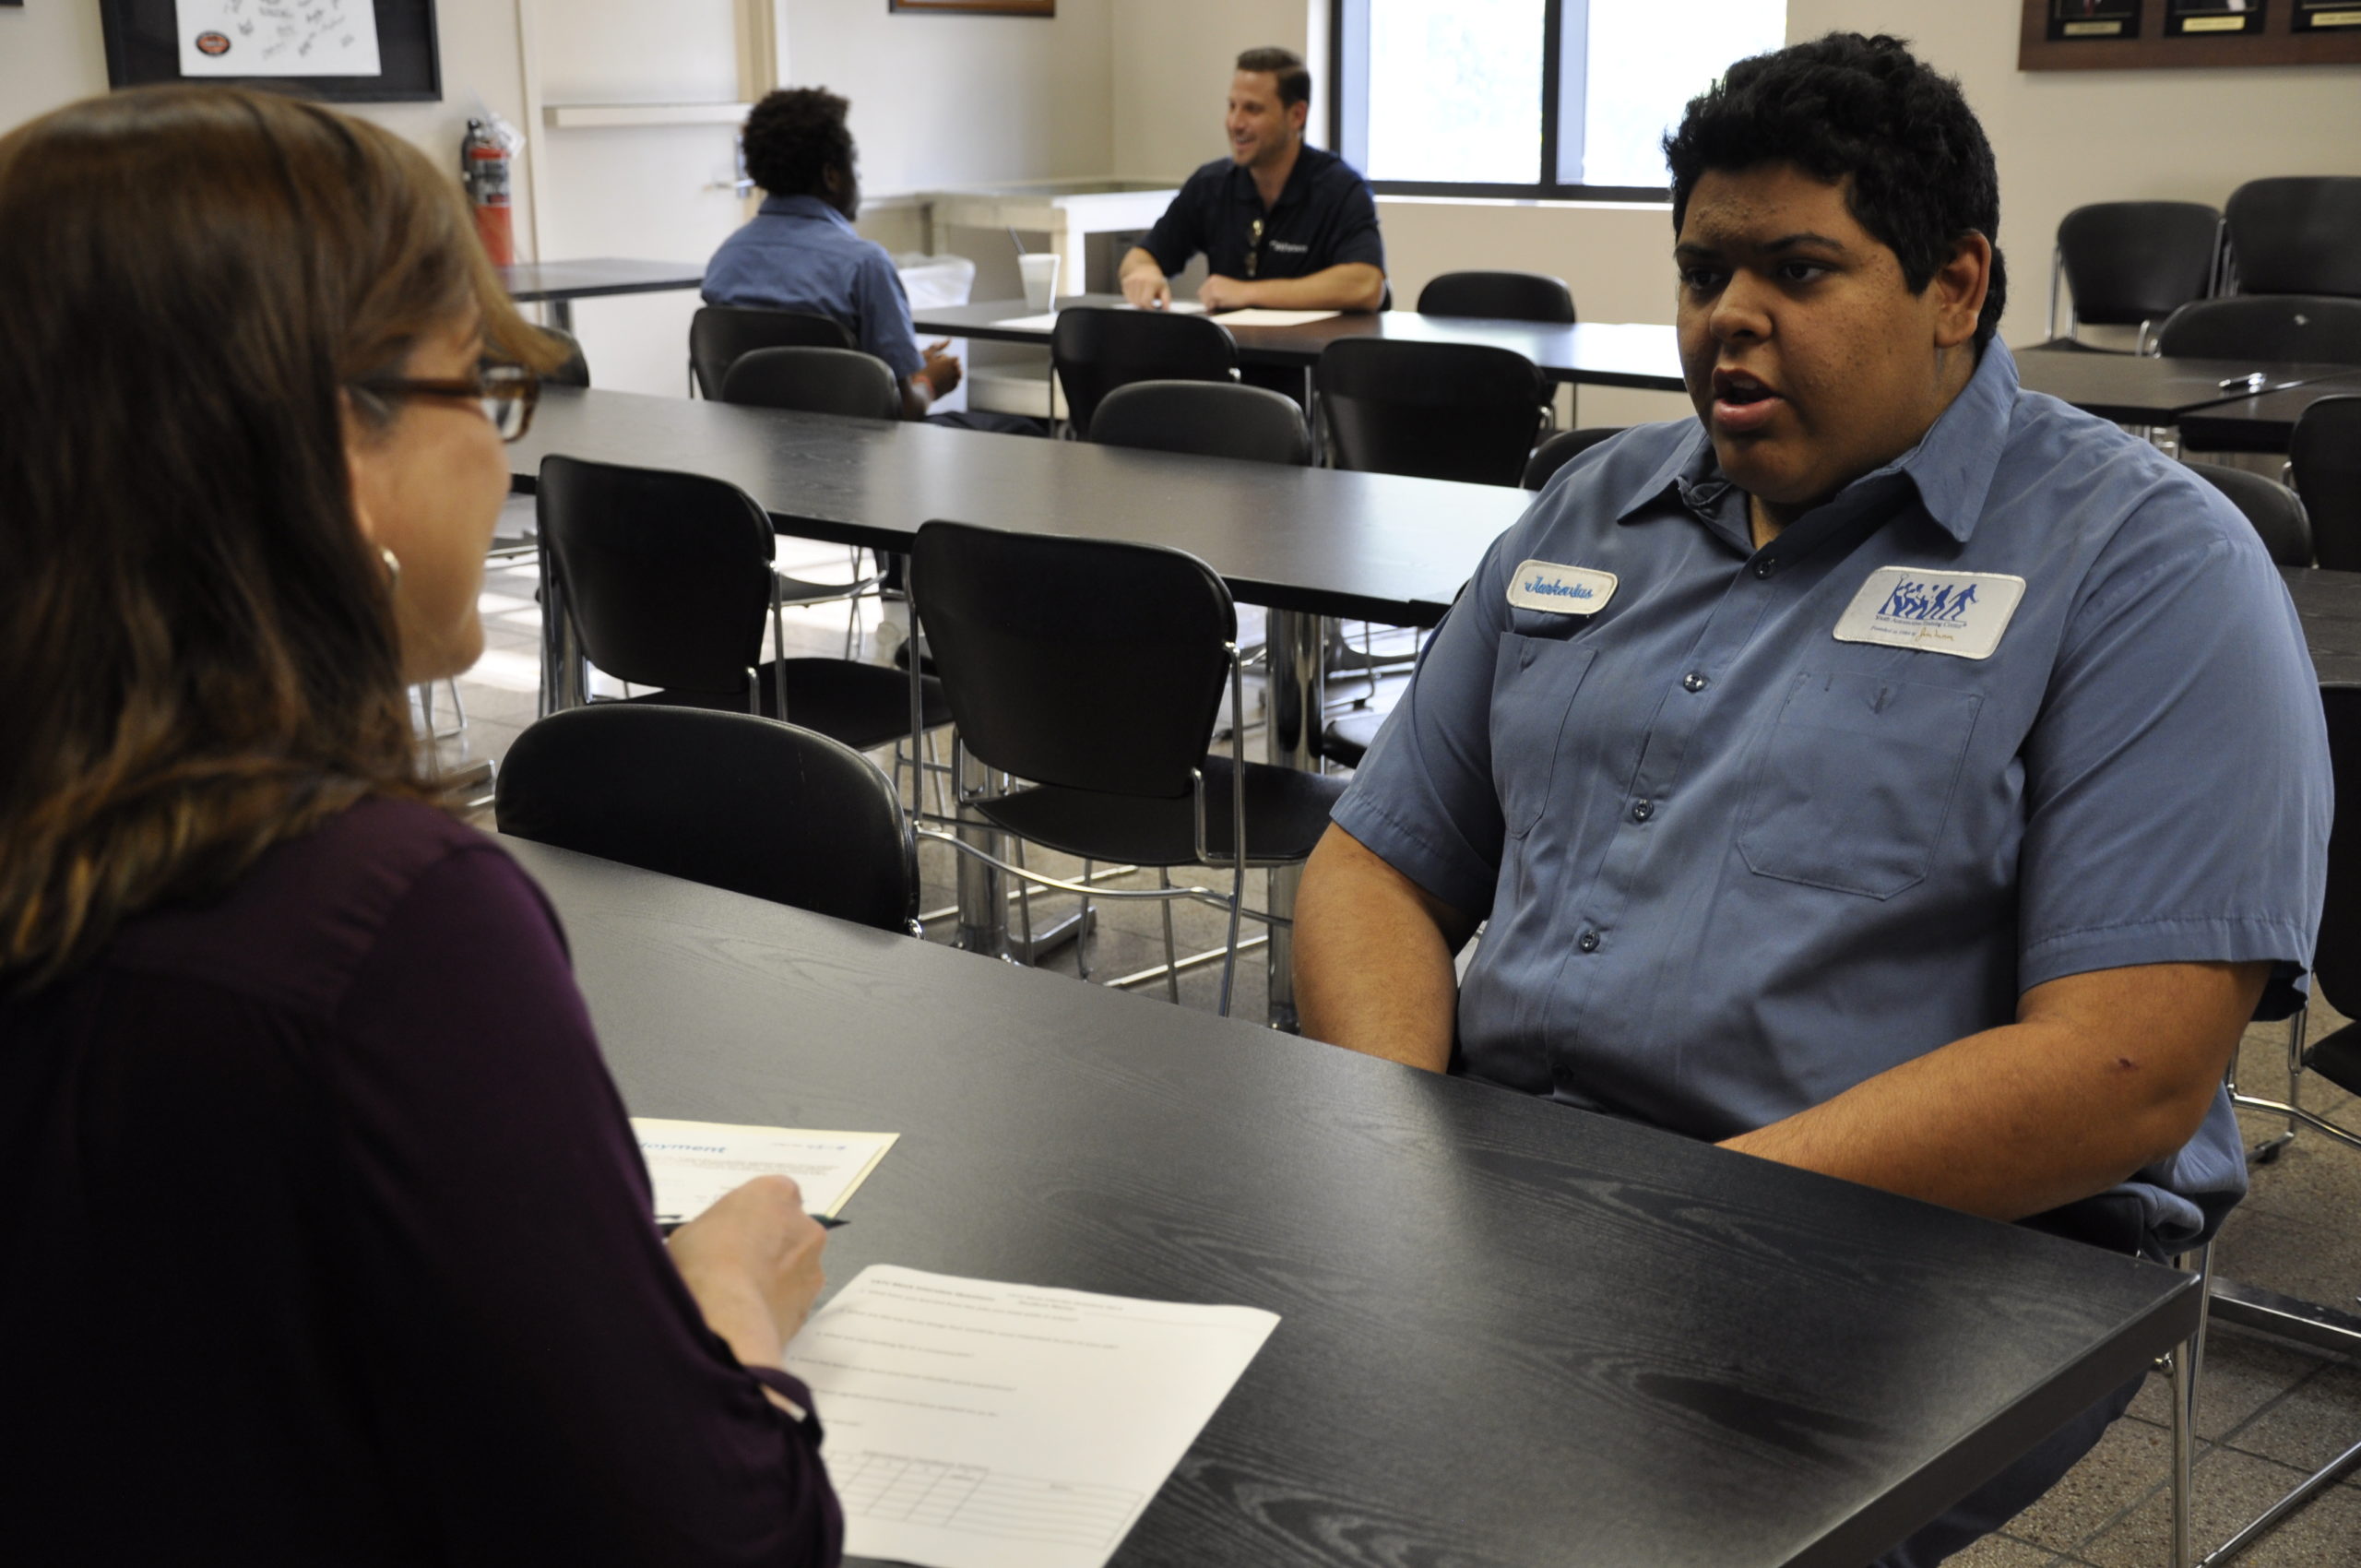 Practice interviews prepare students for the real world.